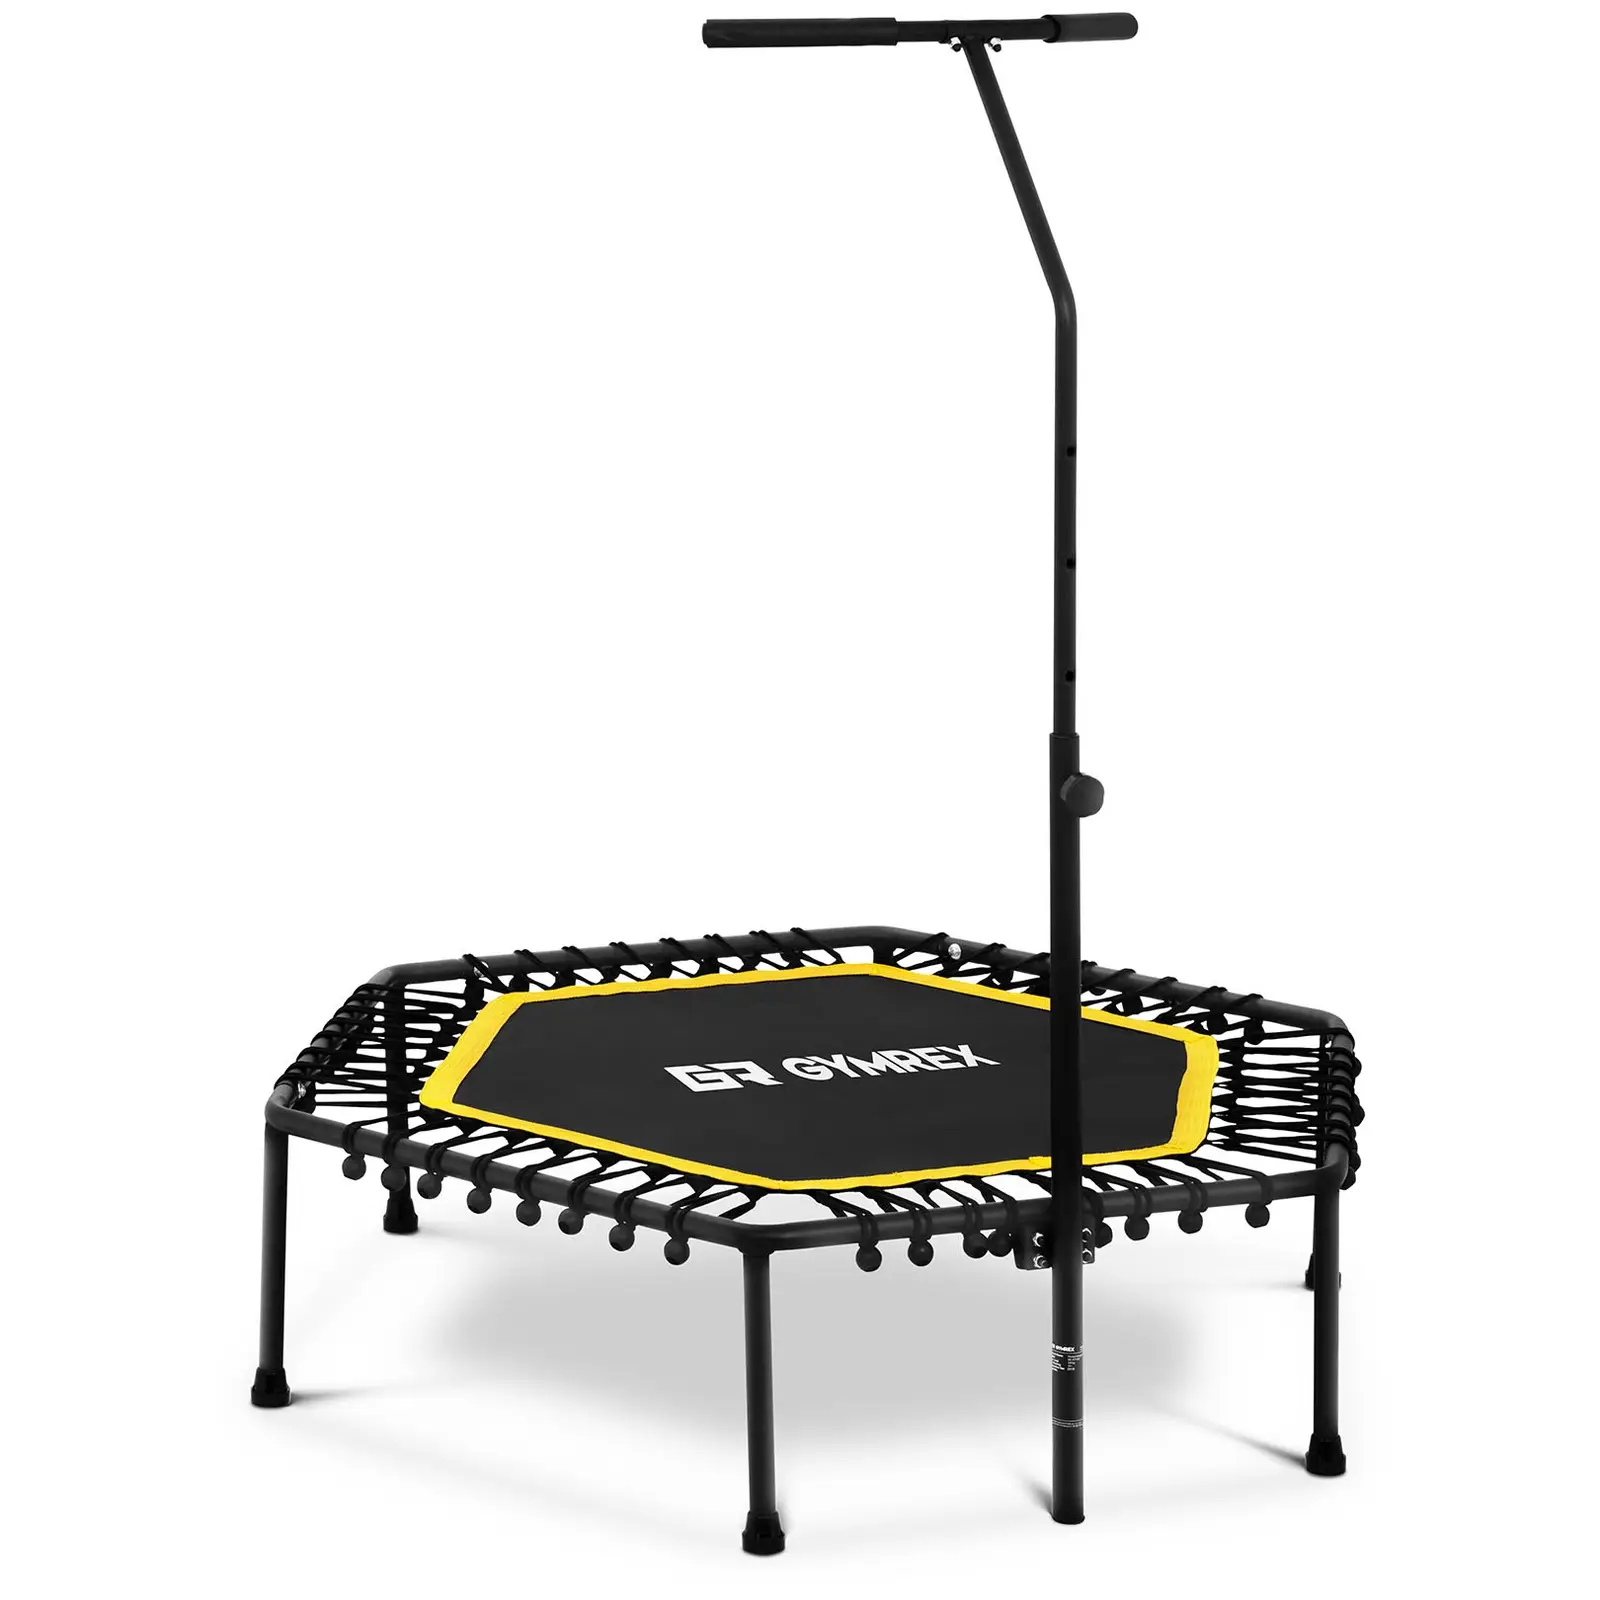 Factory second Fitness Trampoline - with handlebar - yellow